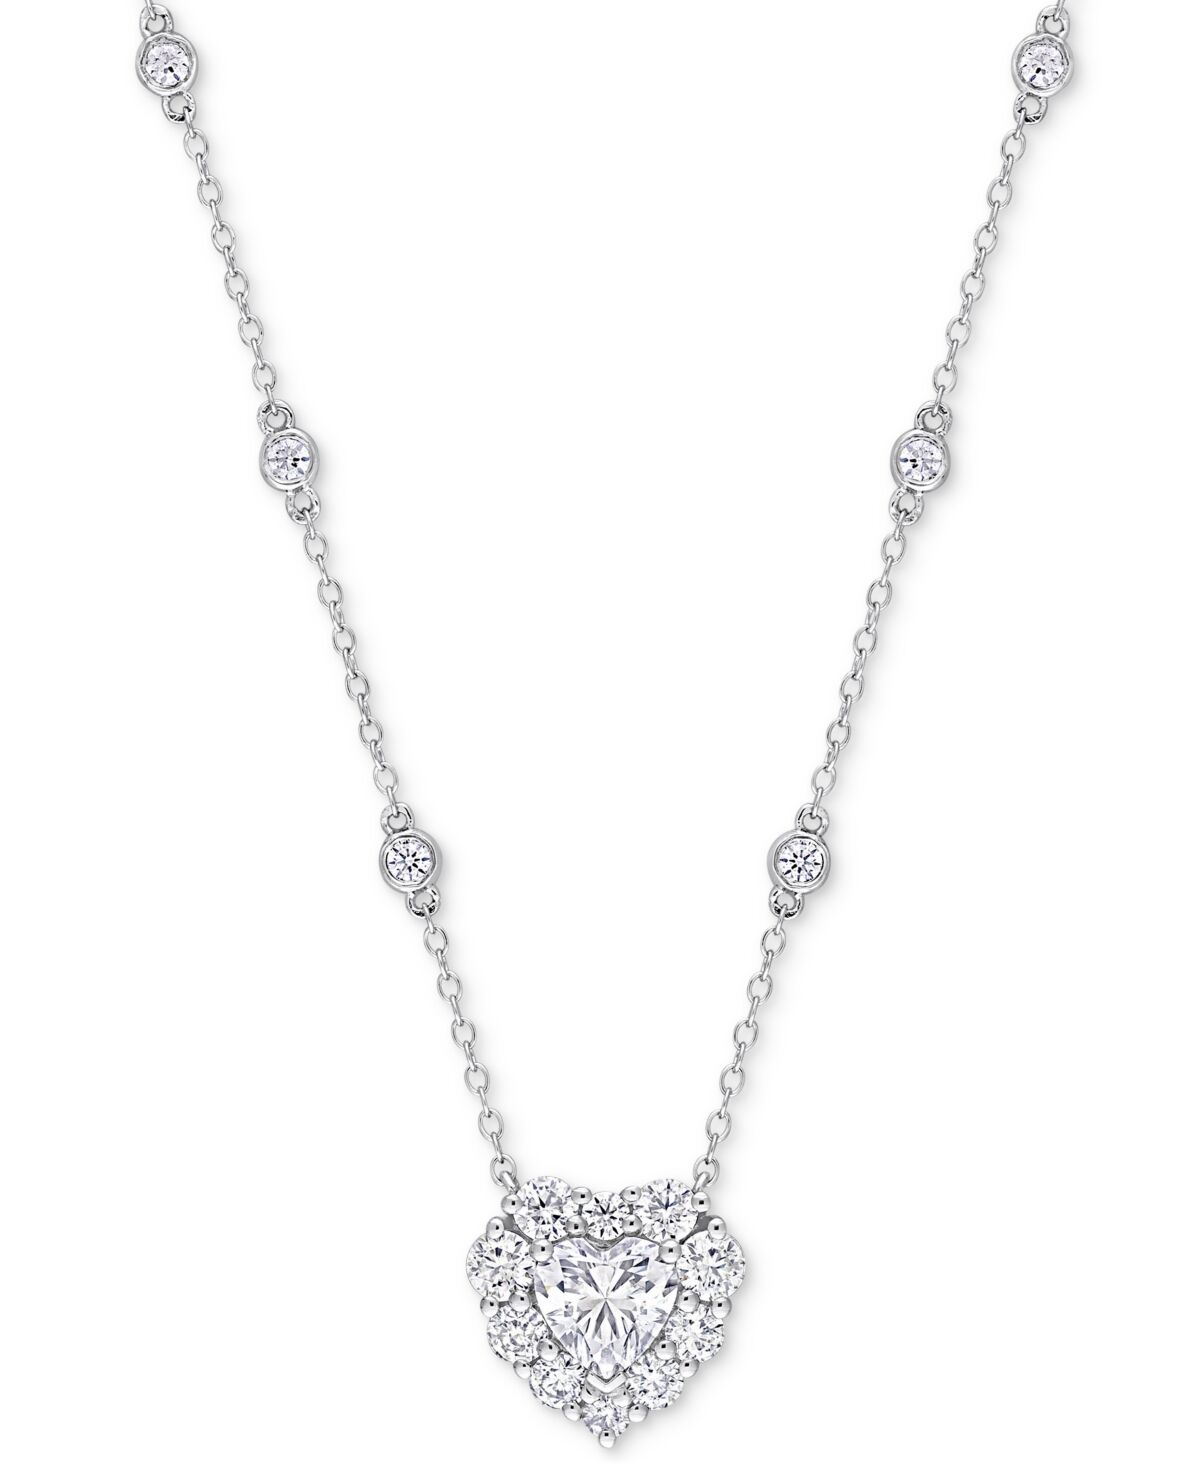 Macy's Moissanite Heart Halo Pendant Necklace (2 ct. t.w.) in Sterling Silver, 18